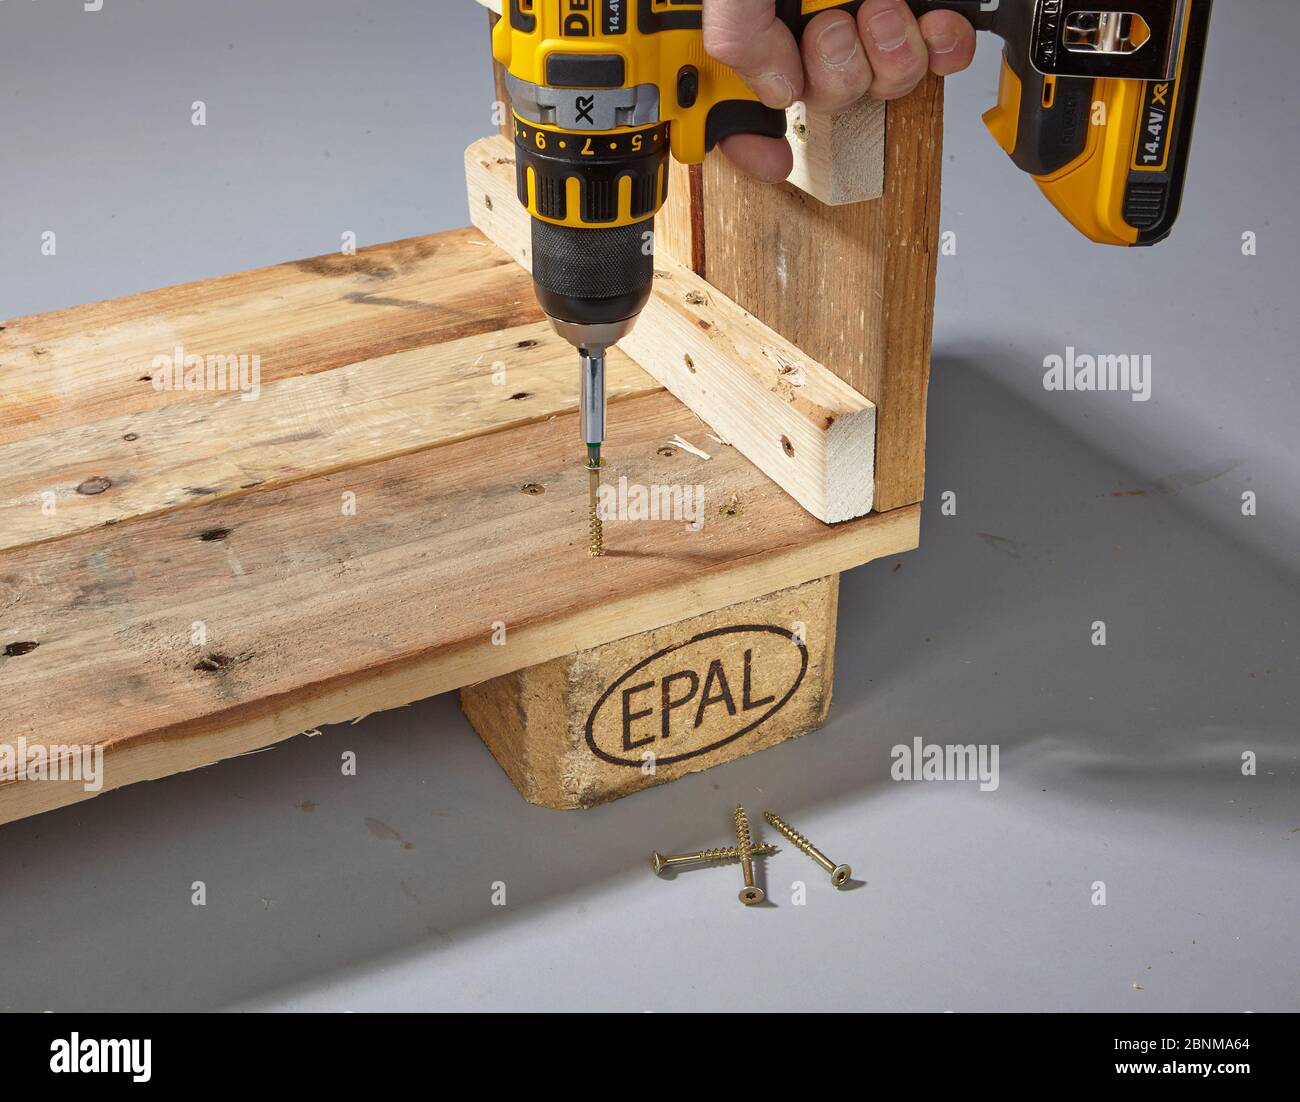 Construction of a shelf made of wood, Euro pallet, solid wood, MDF board; Do-it-yourself production, step-by-step, step 6: screwing on the blocks with the cordless screwdriver and wood screws Stock Photo